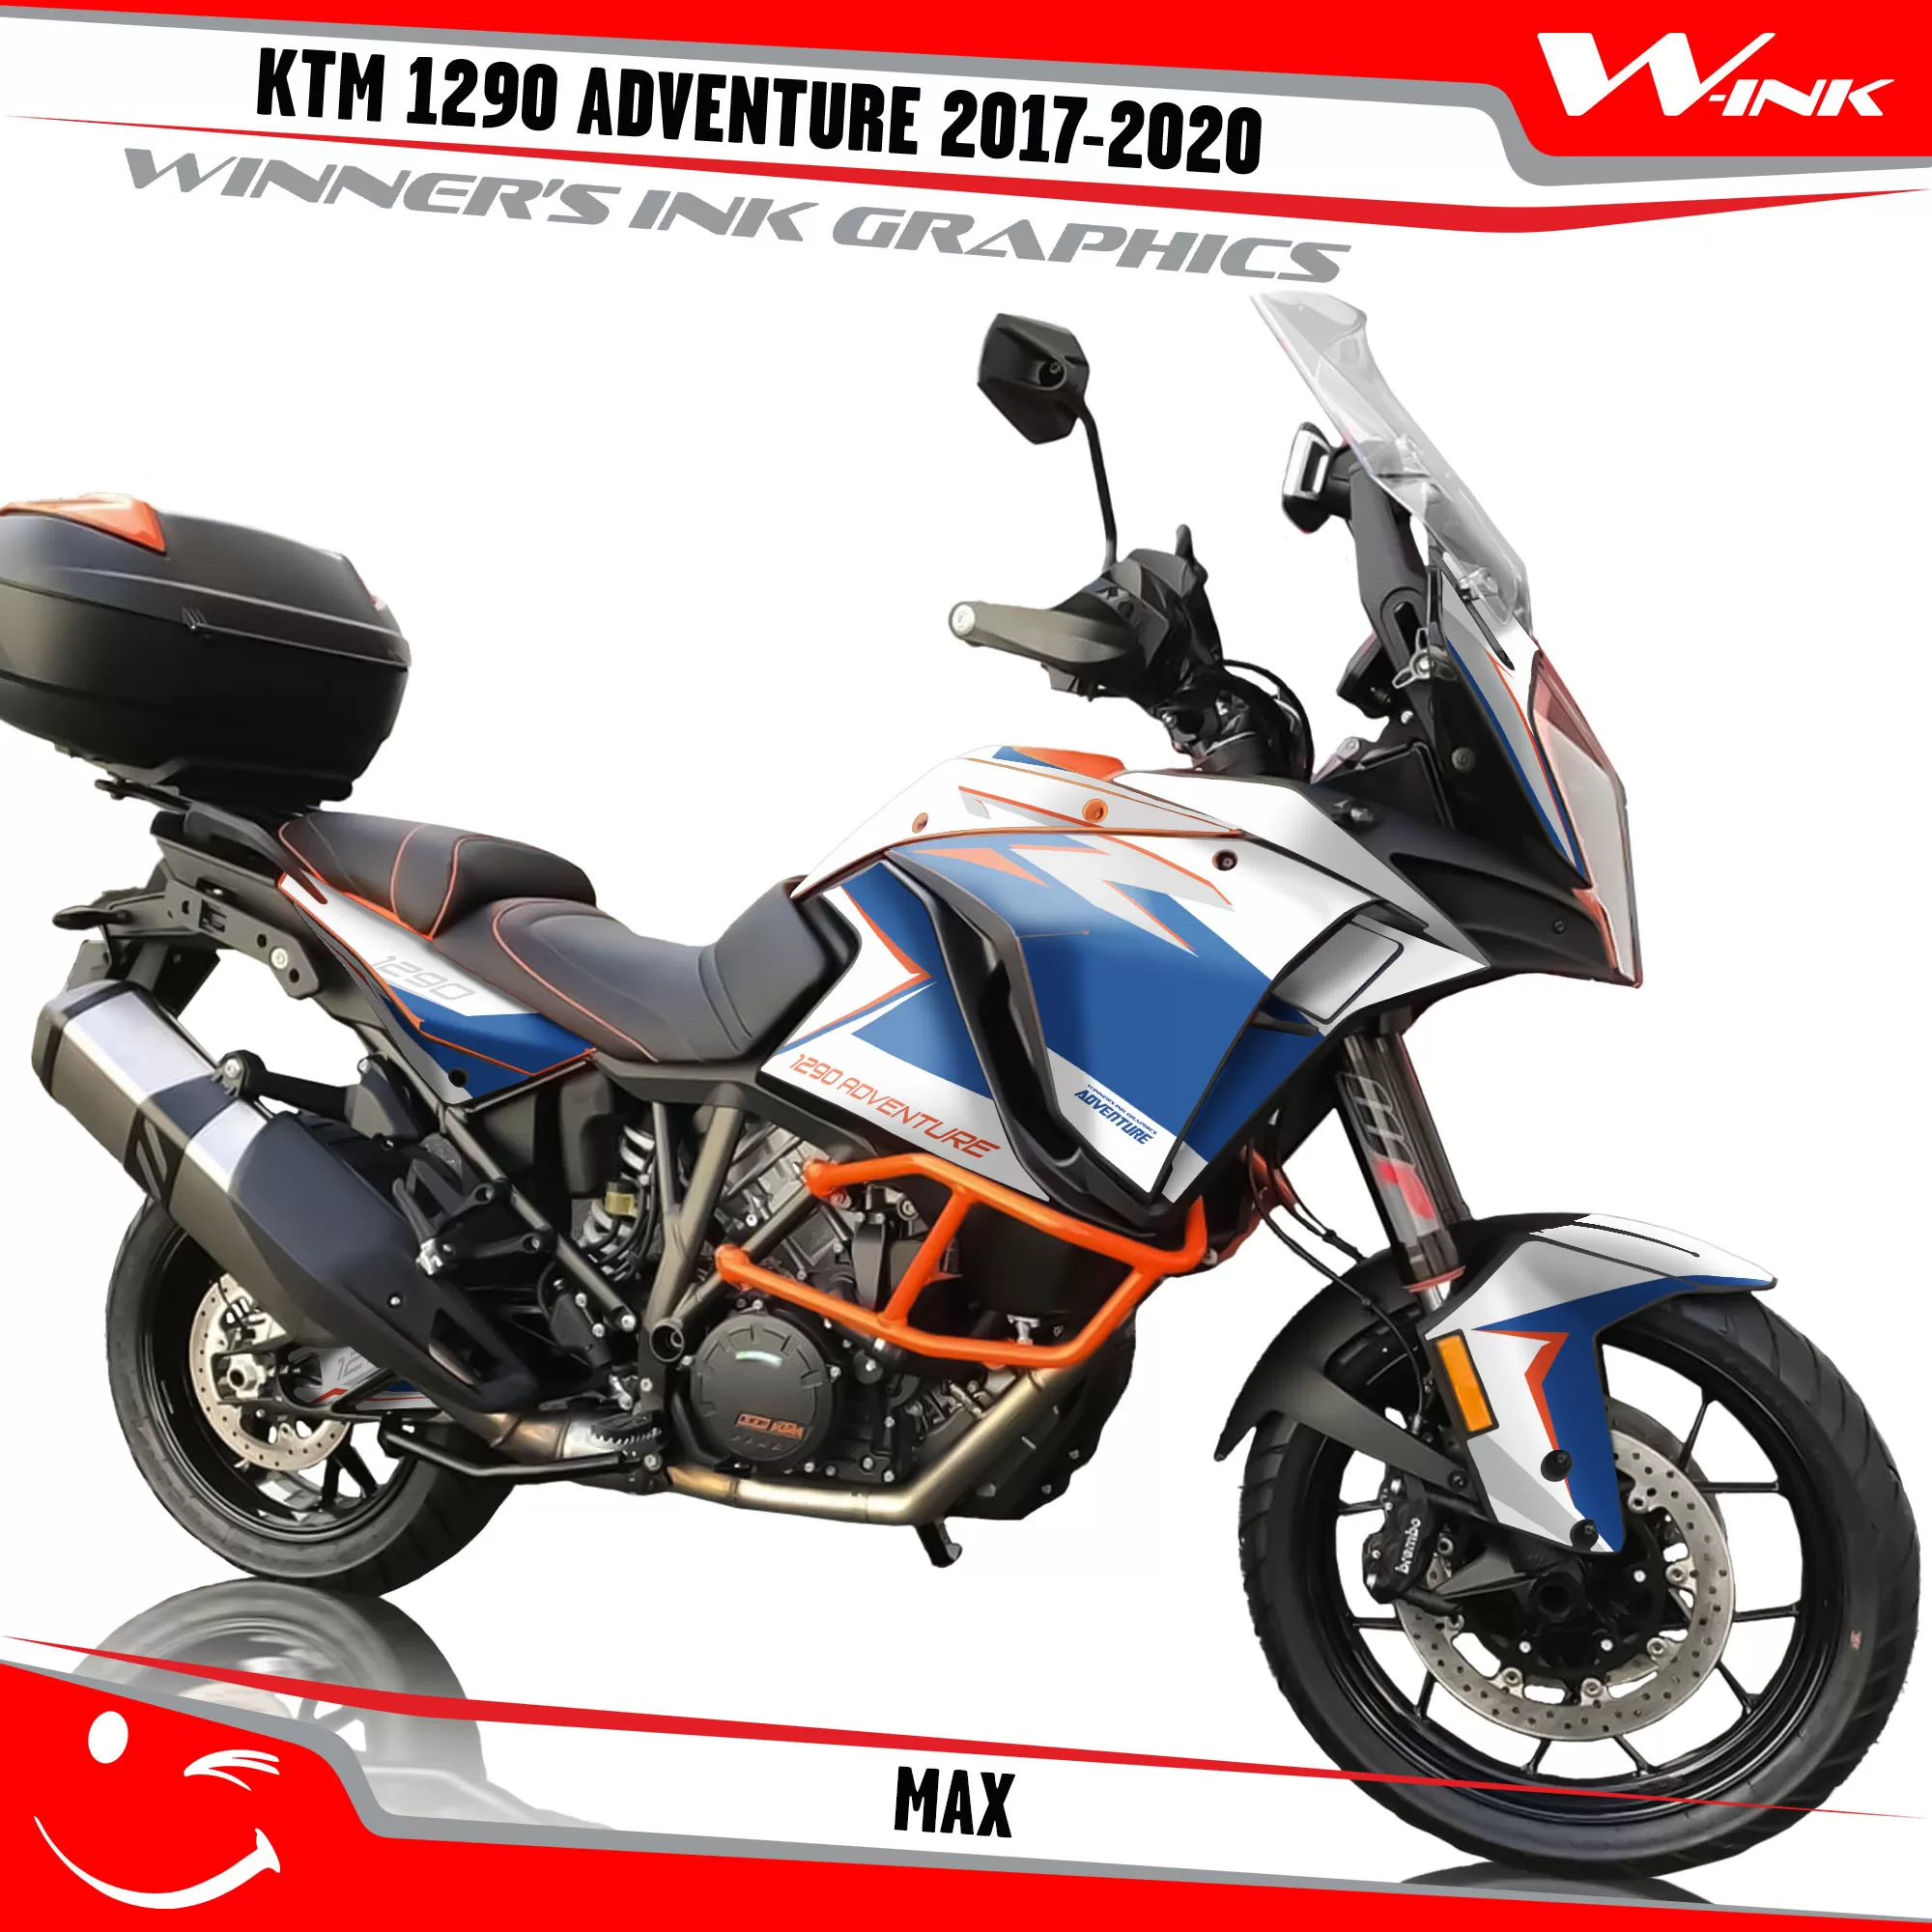 KTM-Adventure-1290-2017-2018-2019-2020-graphics-kit-and-decals-Max